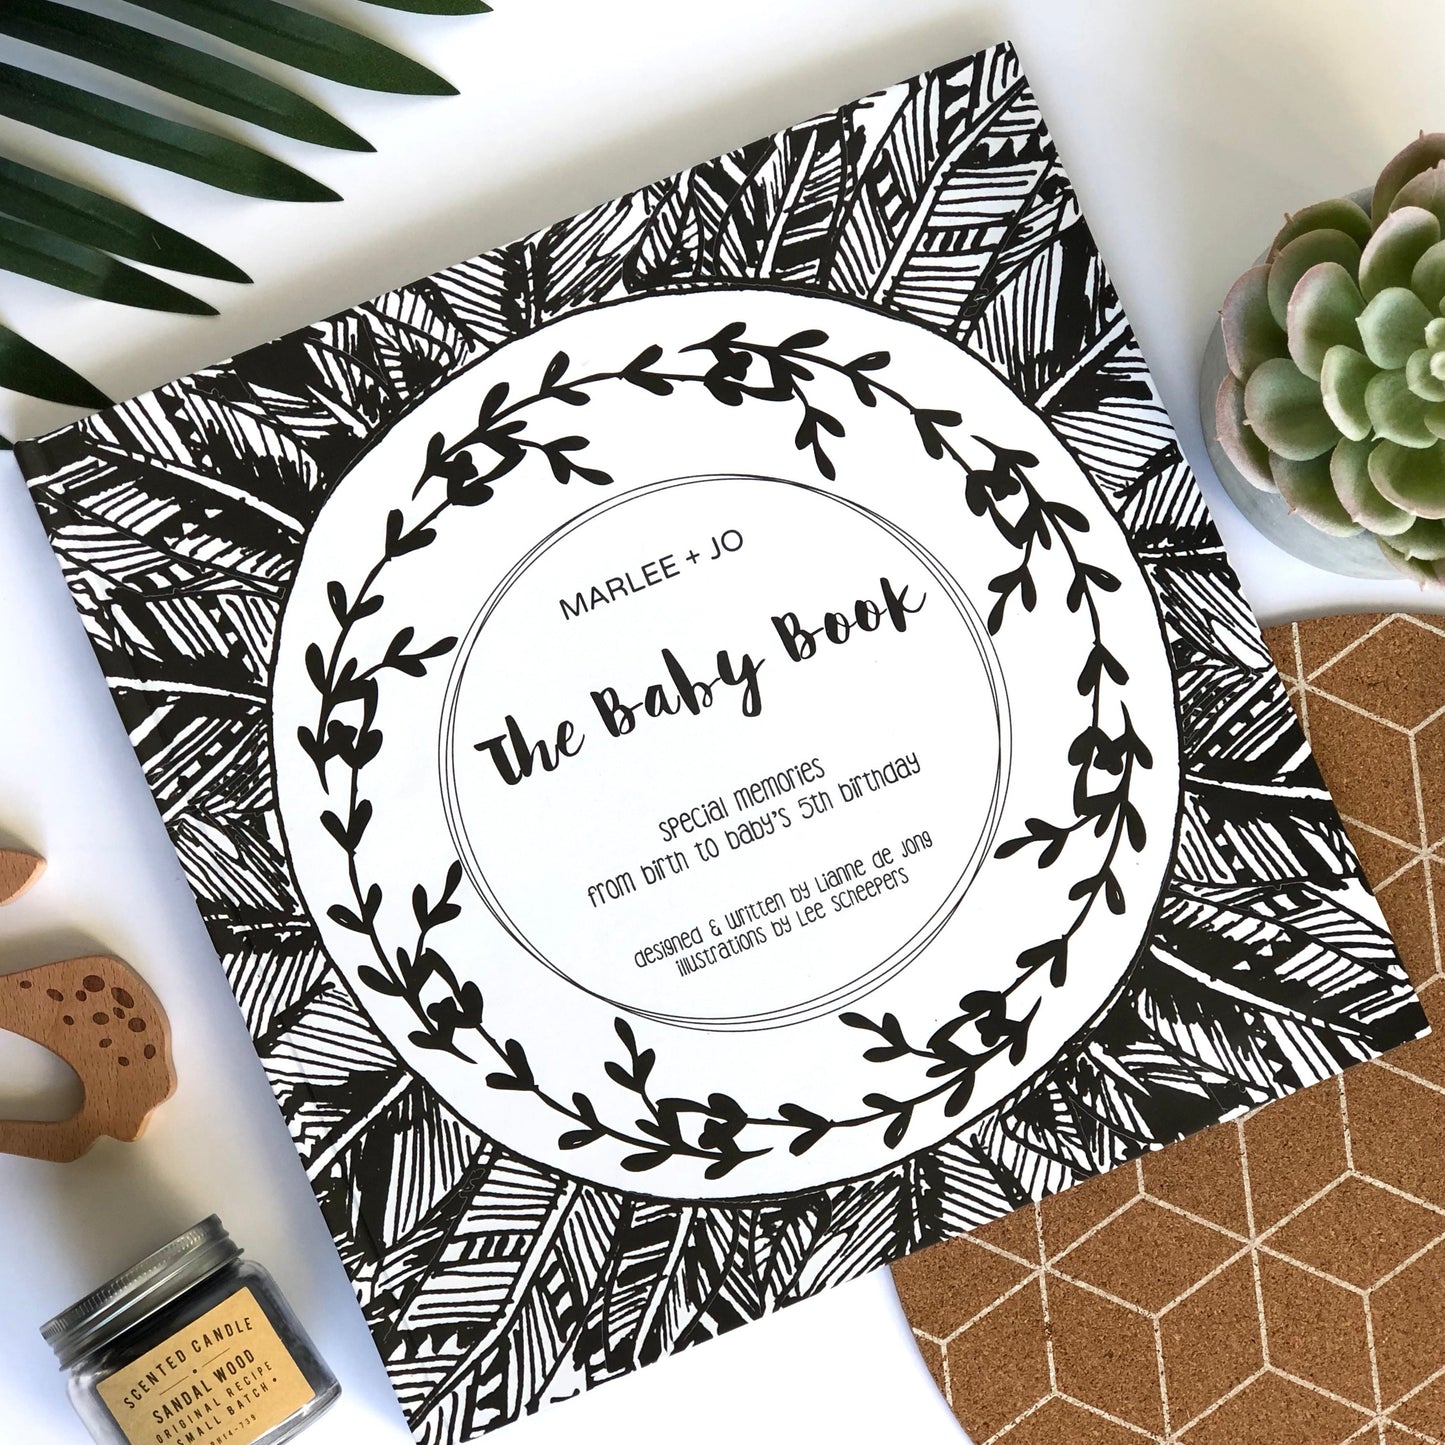 The Baby Book - Monochrome Collection